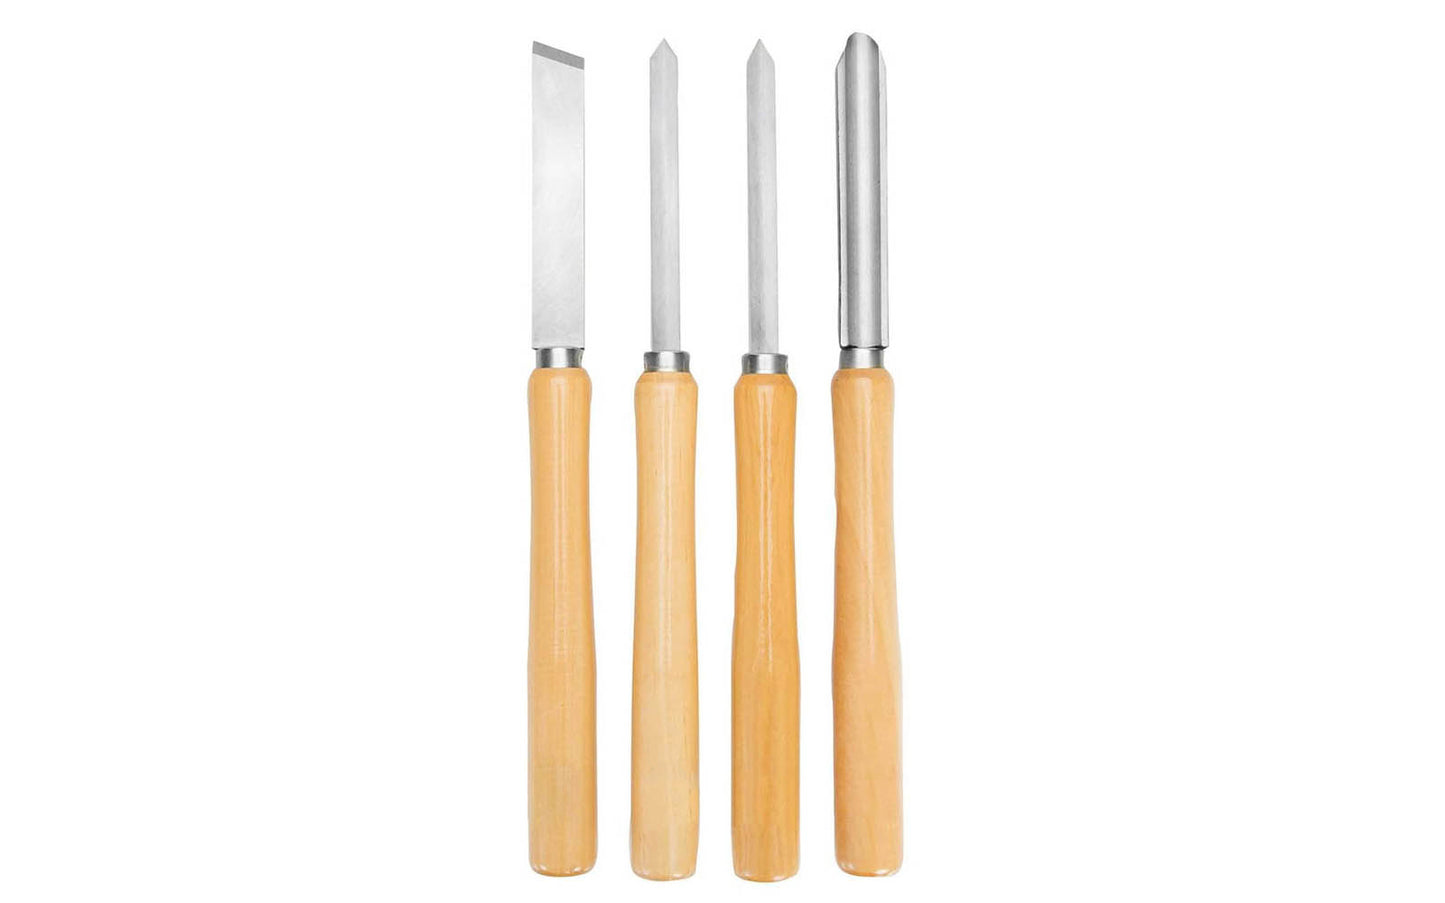 4-piece Wood Turning Tool Set made by Great Neck. Blades are made of high carbon alloy tool steel. Ground, sharpened, hardened & tempered. Includes: 1" Skew,  1/2" Parting Tool,  1/2" Spear,  1" Gouge. The wooden handles are kiln-dried hardwood handles. Great Neck Mayes Model No. 404